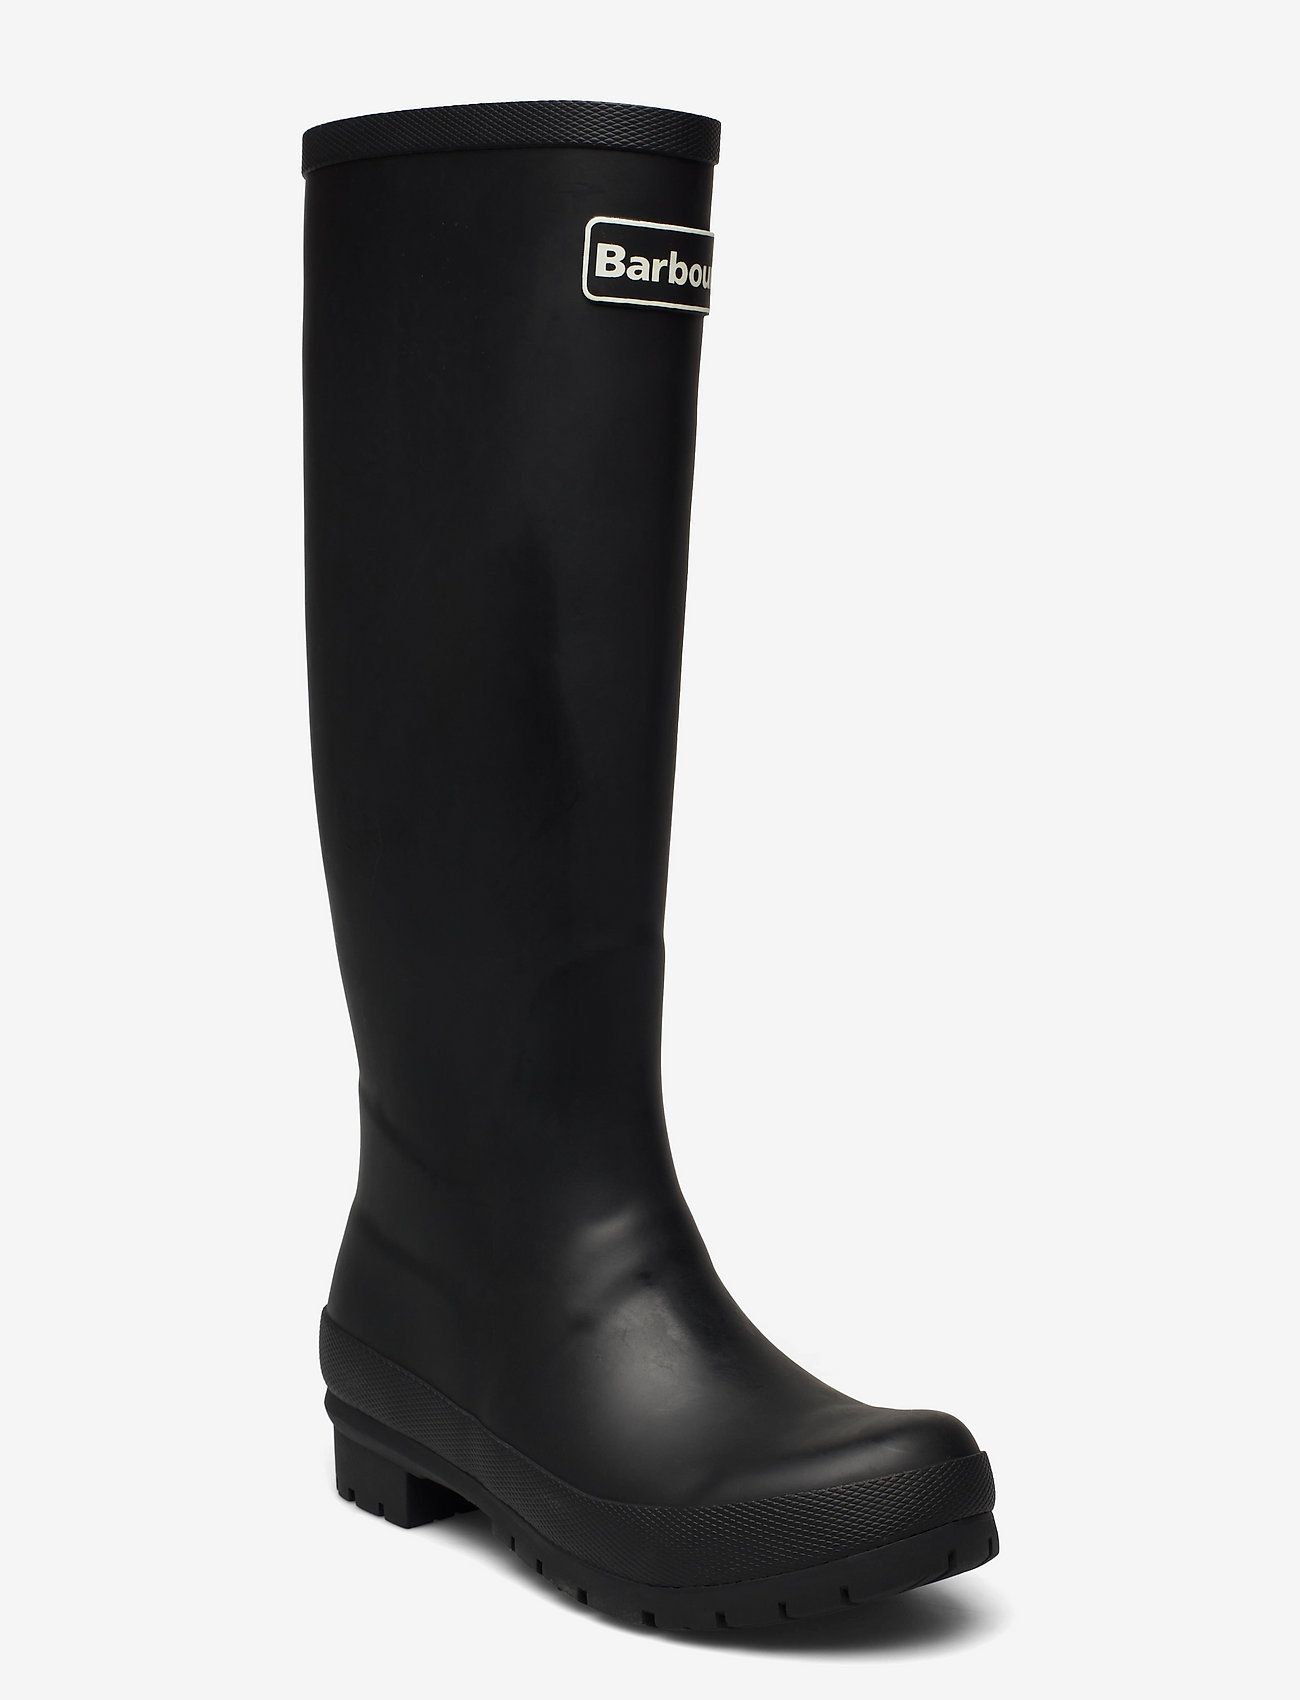 Barbour - Barbour Abbey - knee high boots - black - 0